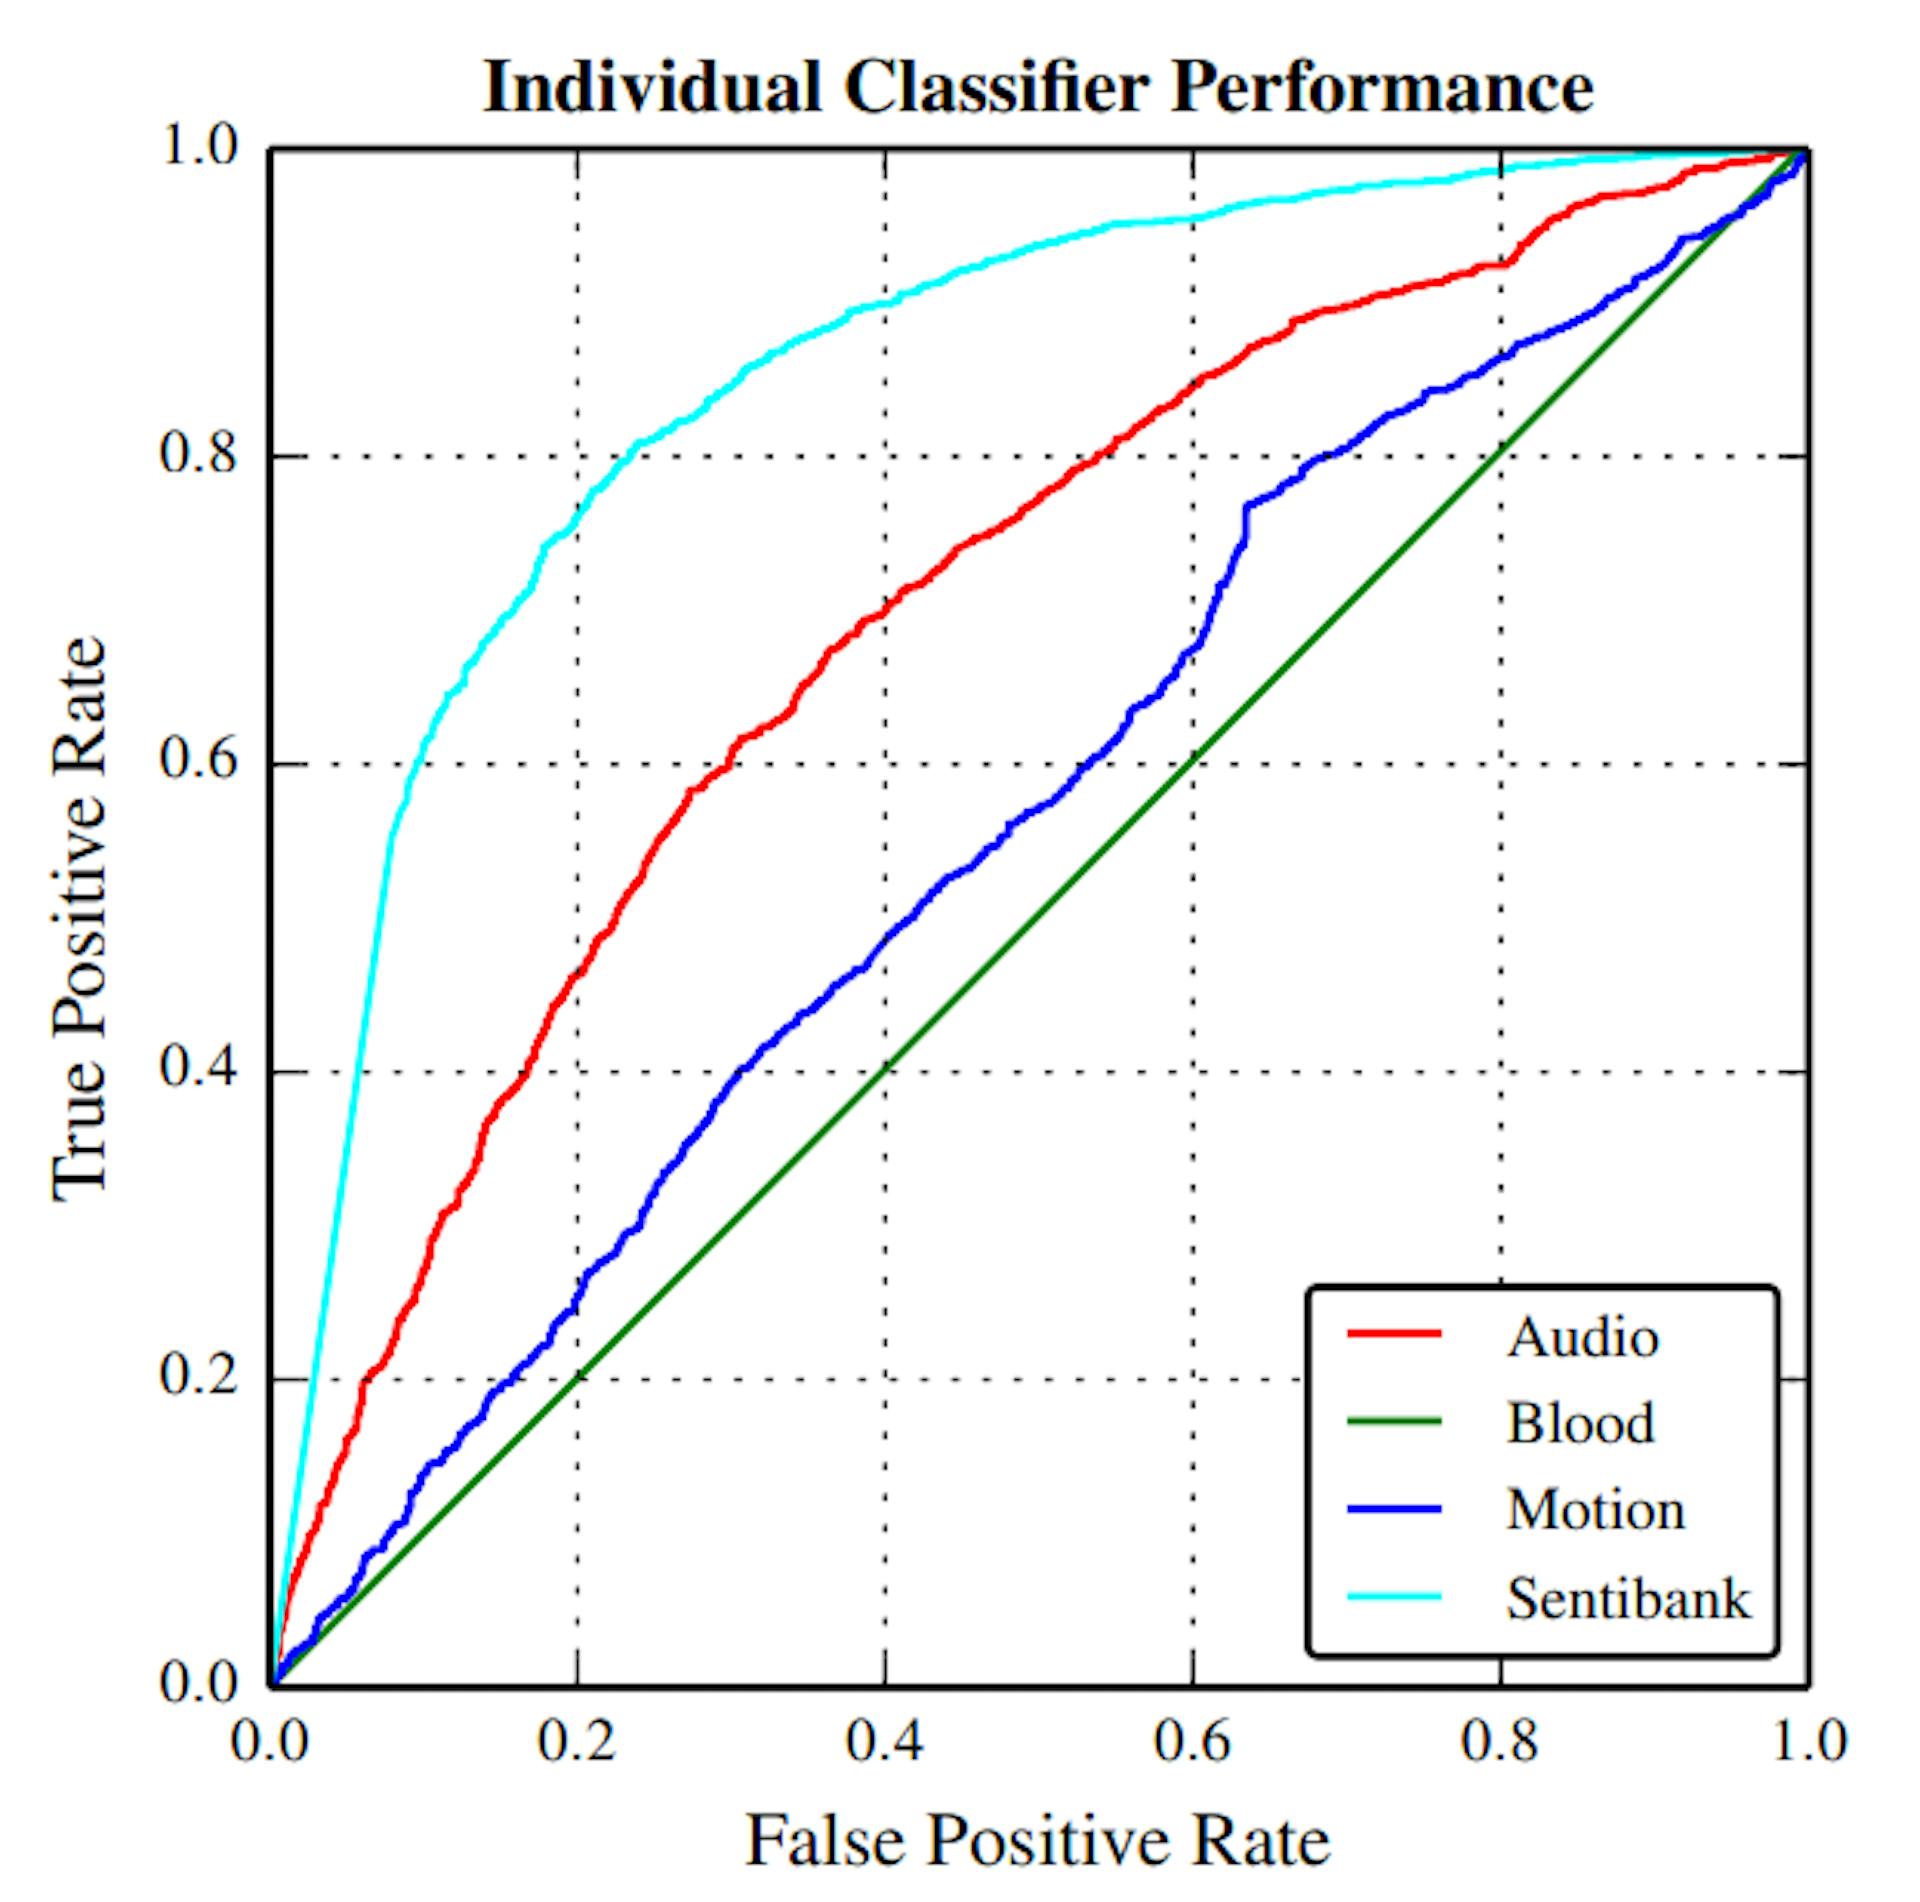 Figure 4.4: Performance of individual binary classifiers on the test set.